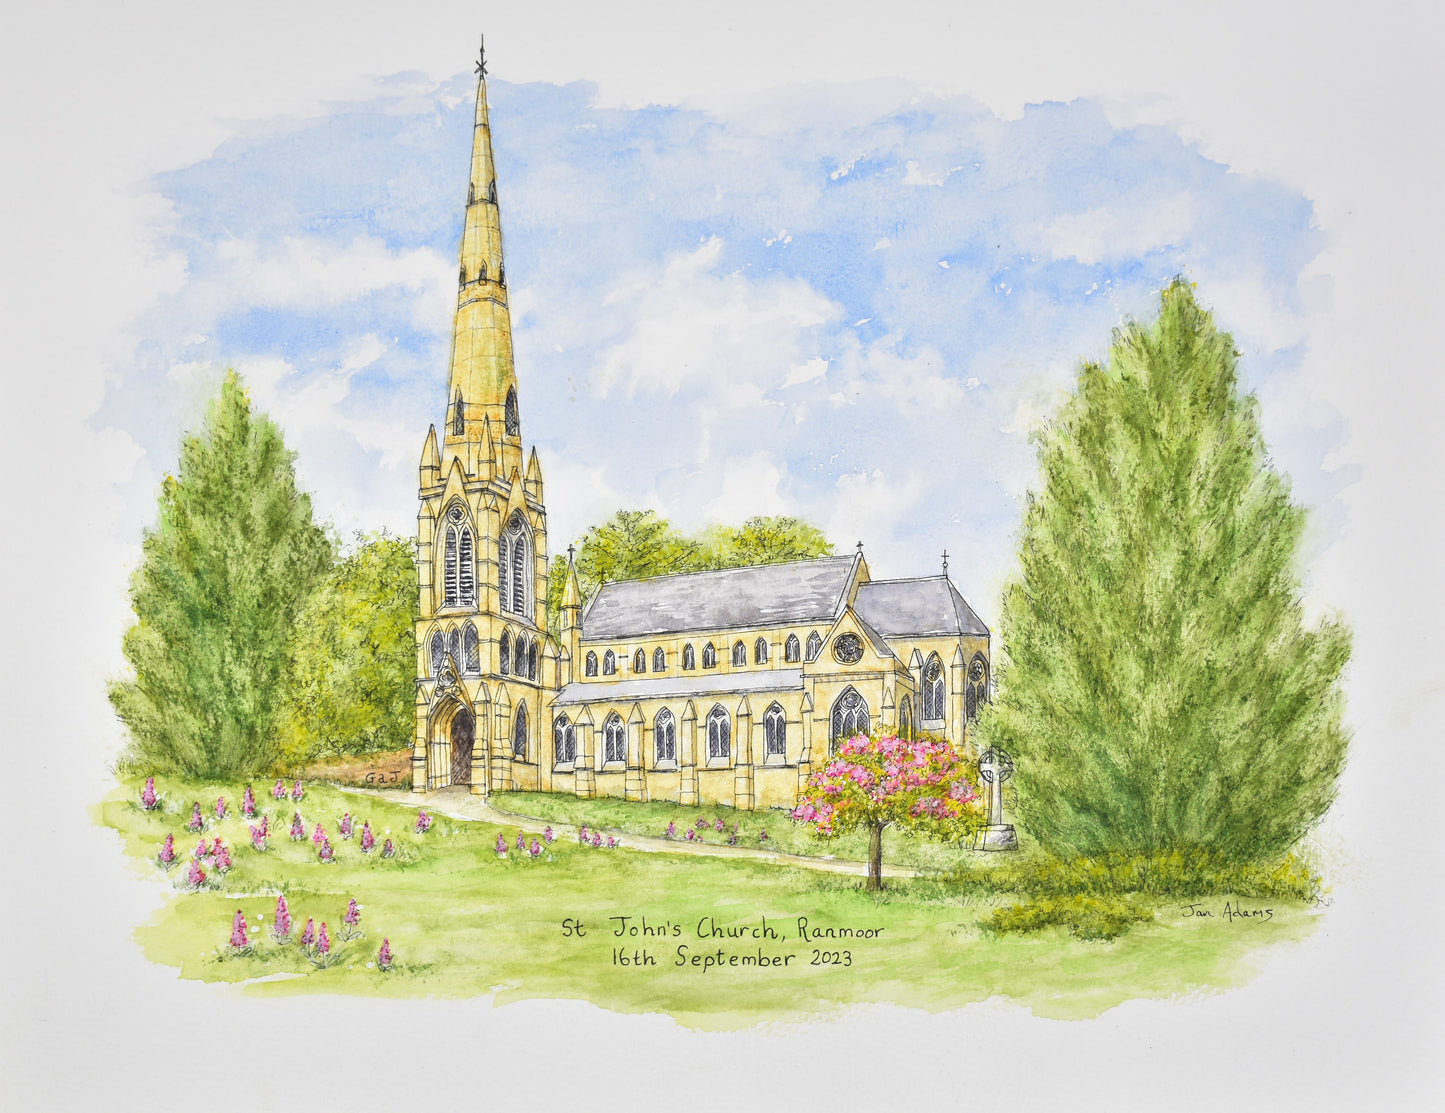 St Johns Church, Ranmore painted in ink and watercolour